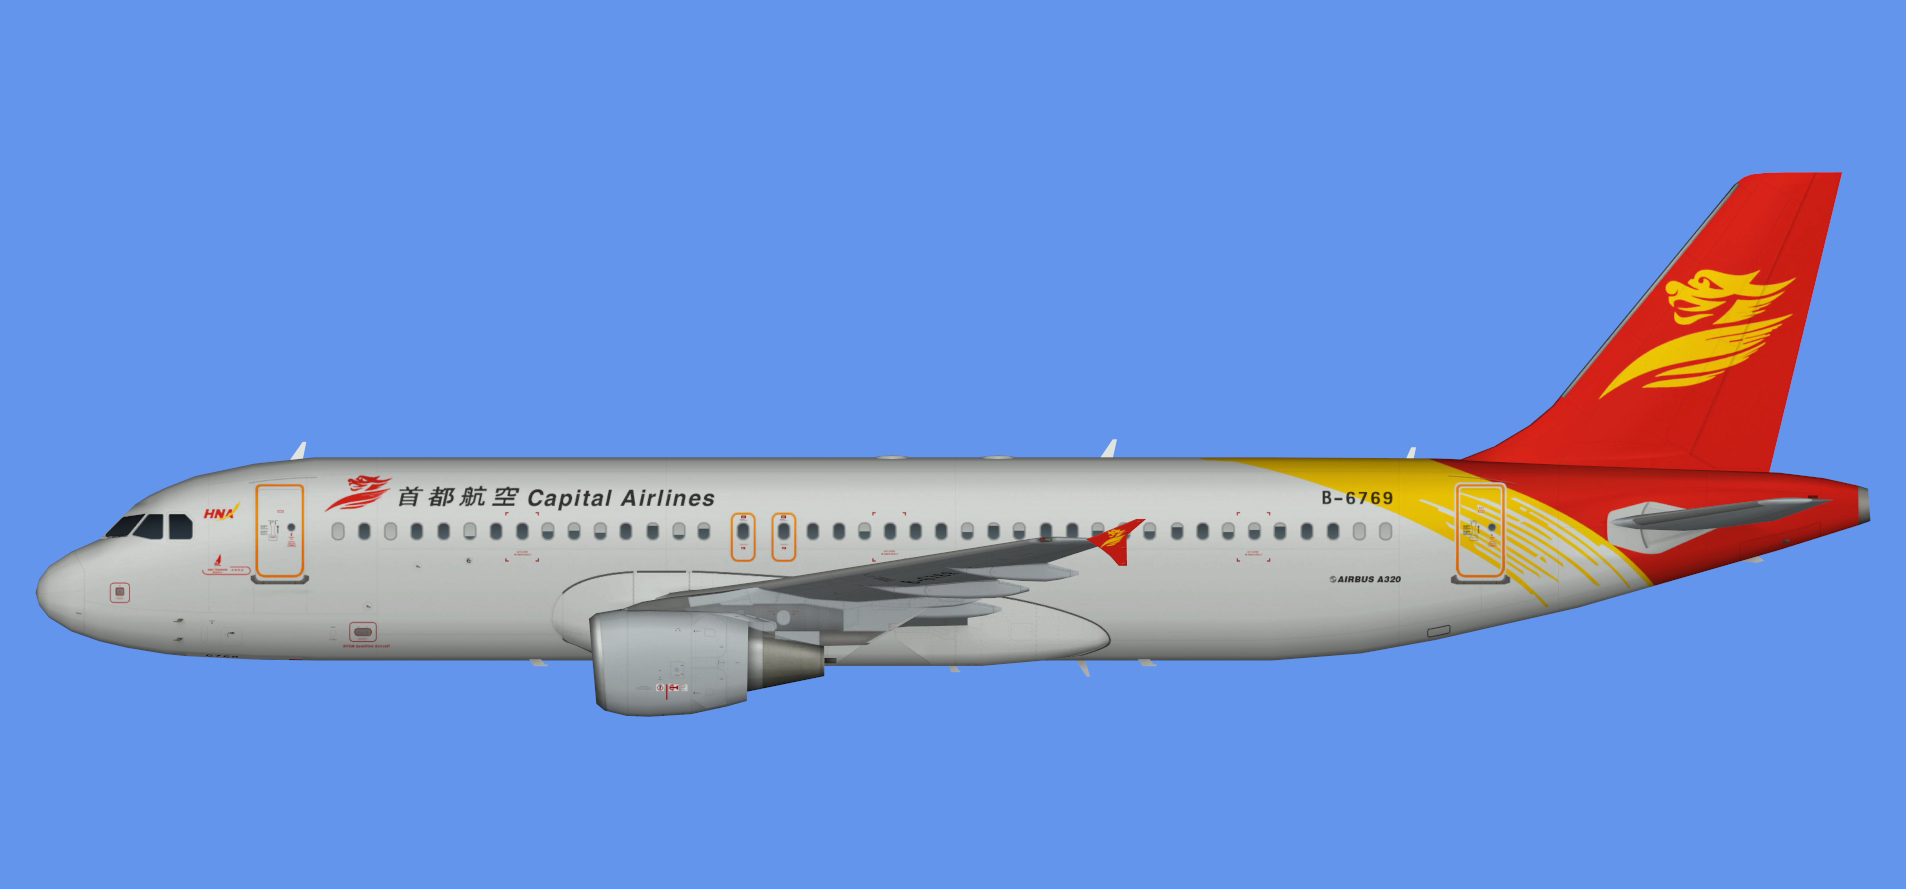 Capital Airlines Airbus A320 CFM